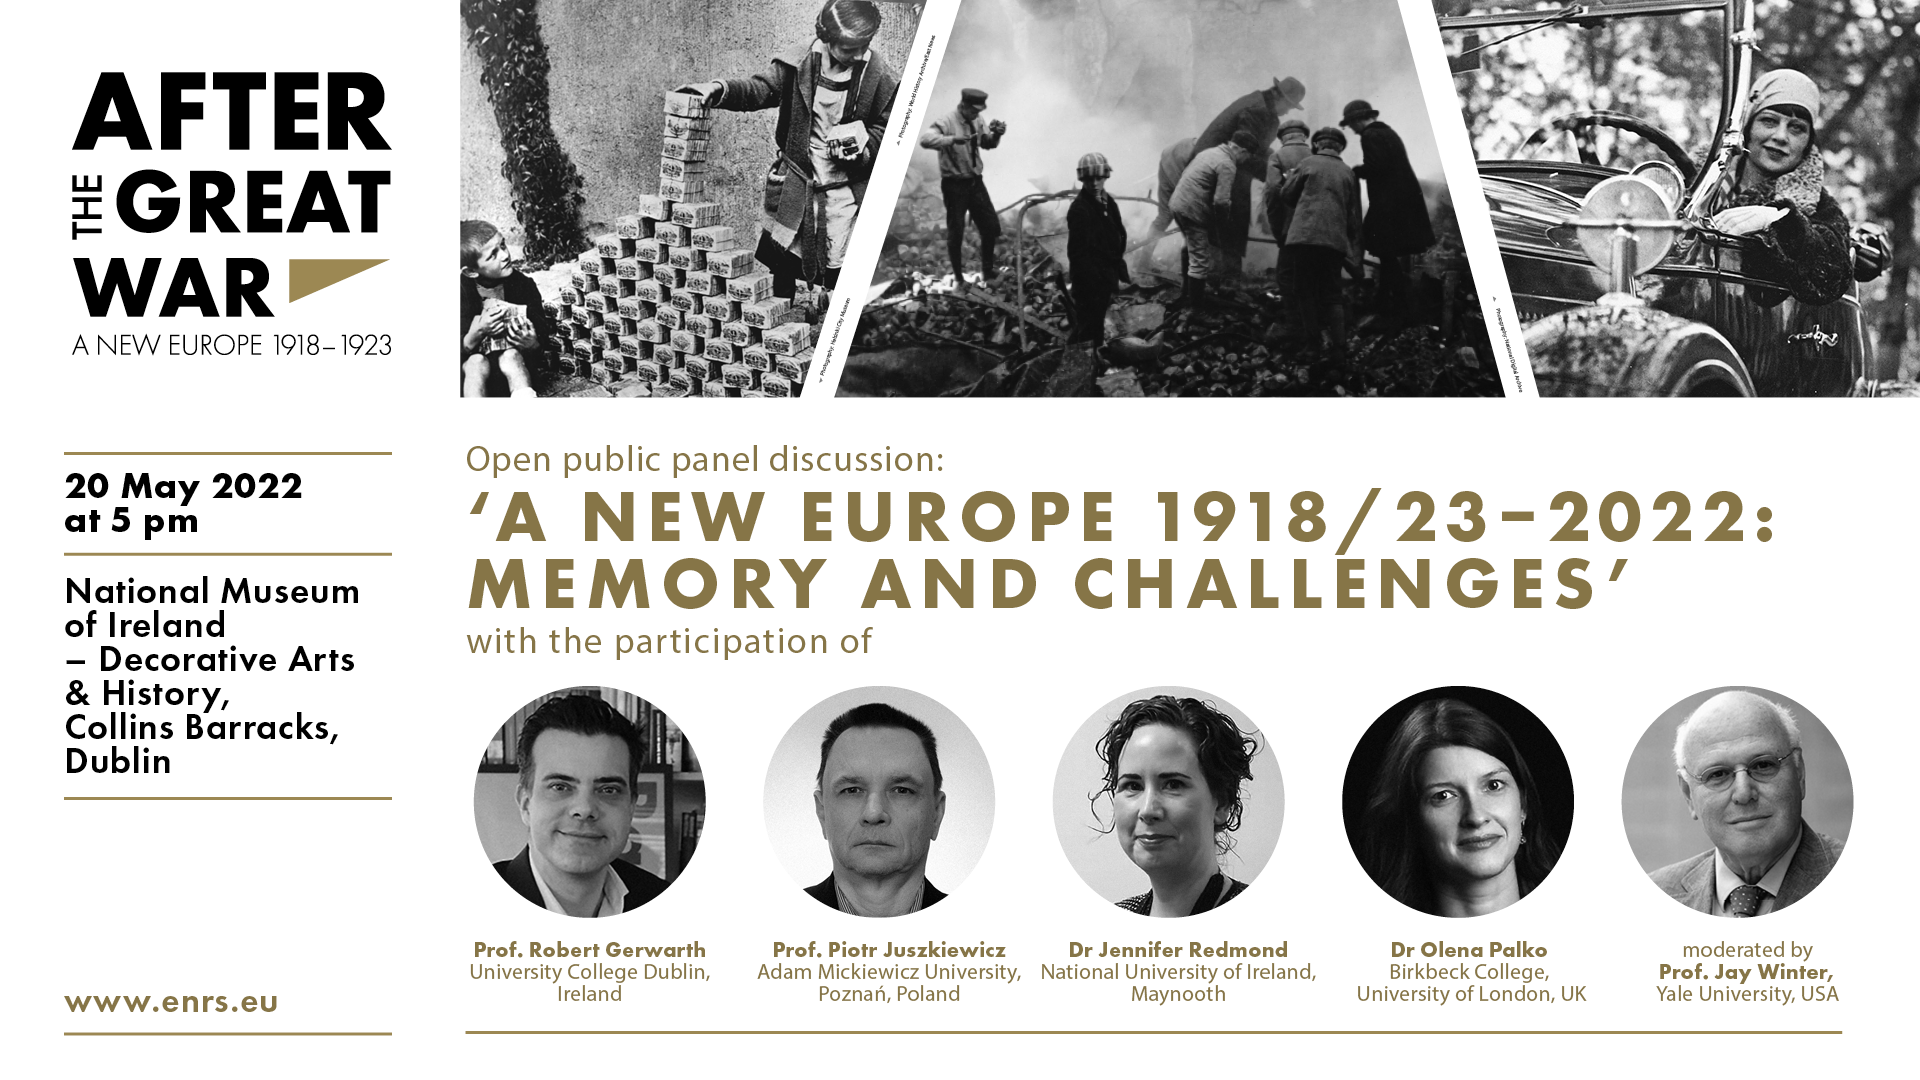 Open public panel discussion in Dublin on New Europe 1918/1923-2022